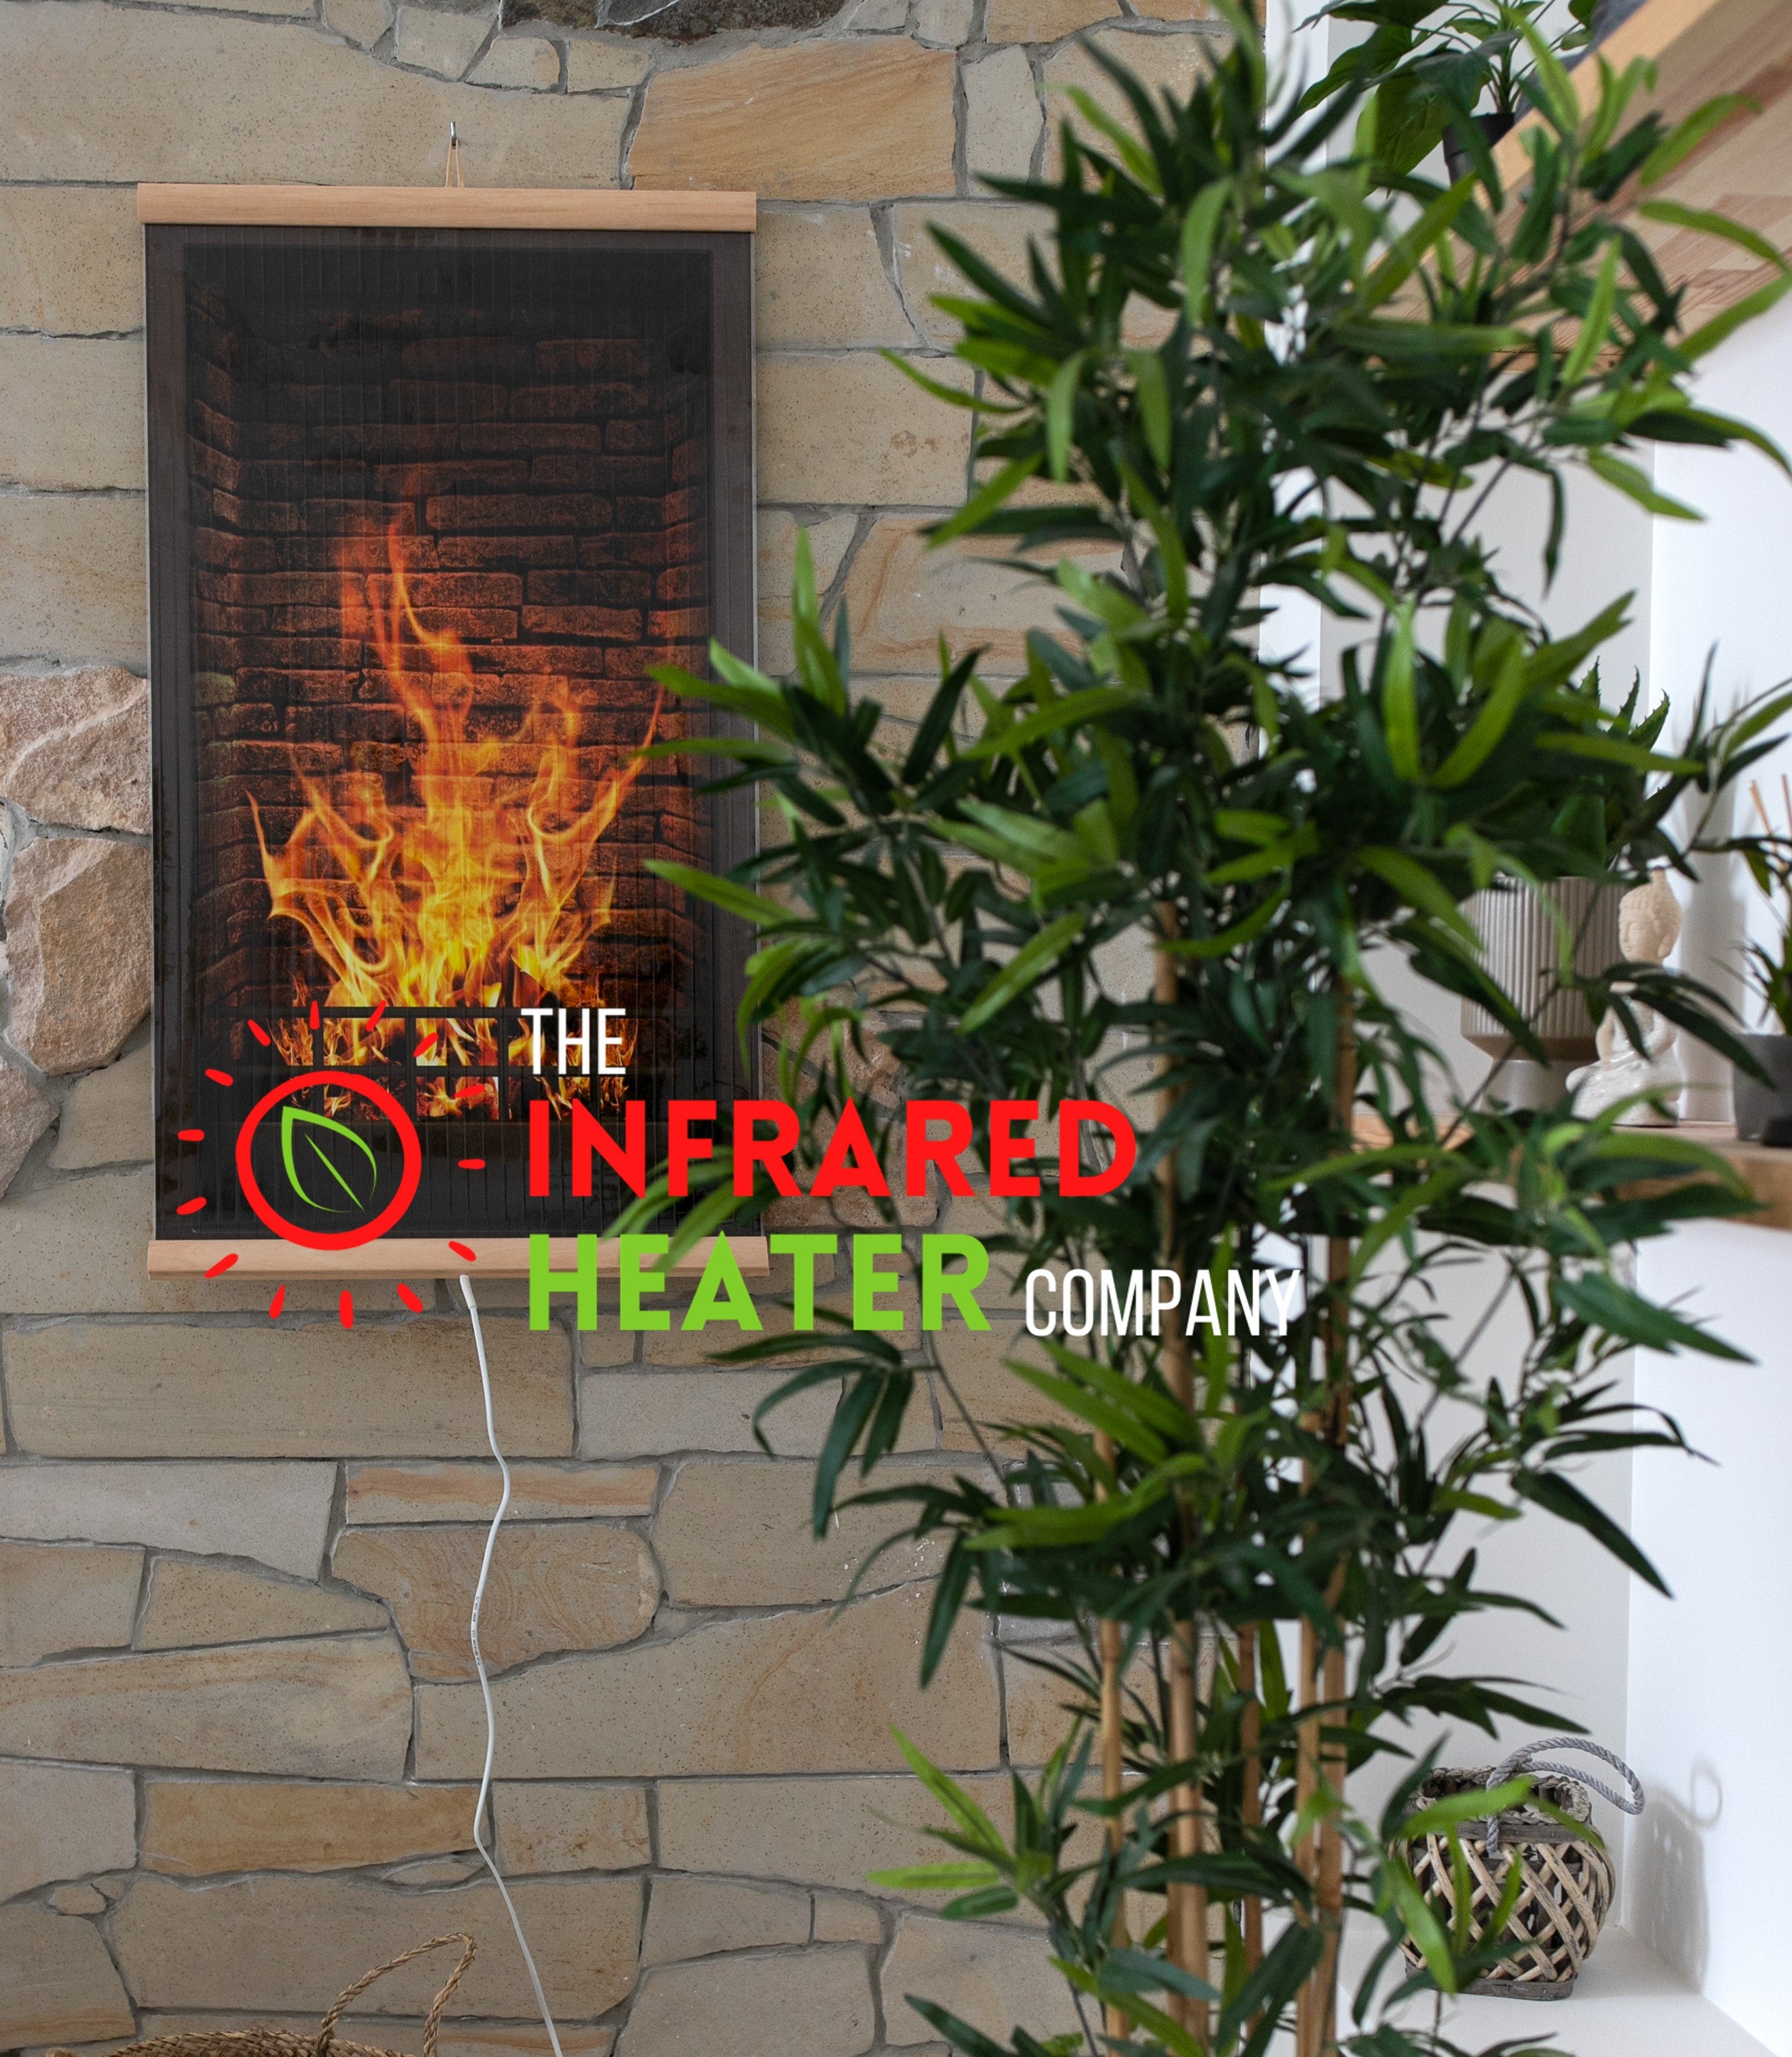 Infrared Wall mounted  Picture Heater. Far Infrared Heating Panel 420W "Fireplace"